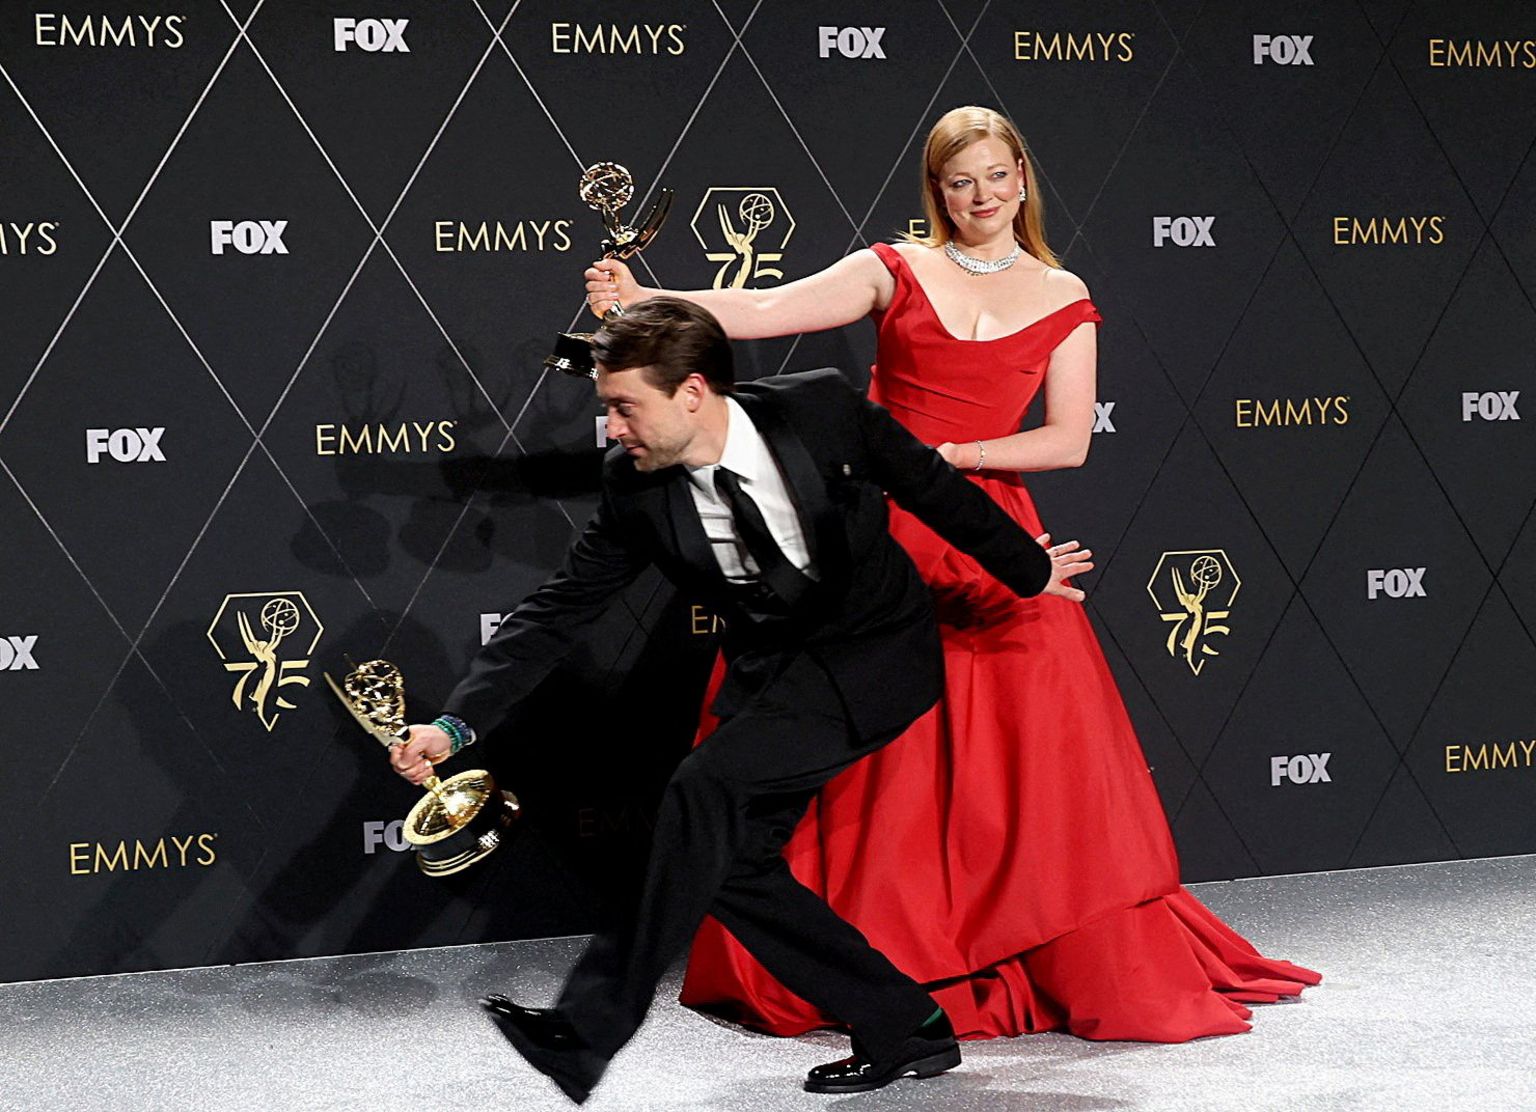 Sarah Snook and Kieran Culkin pose together at the Emmy Awards in Los Angeles, California